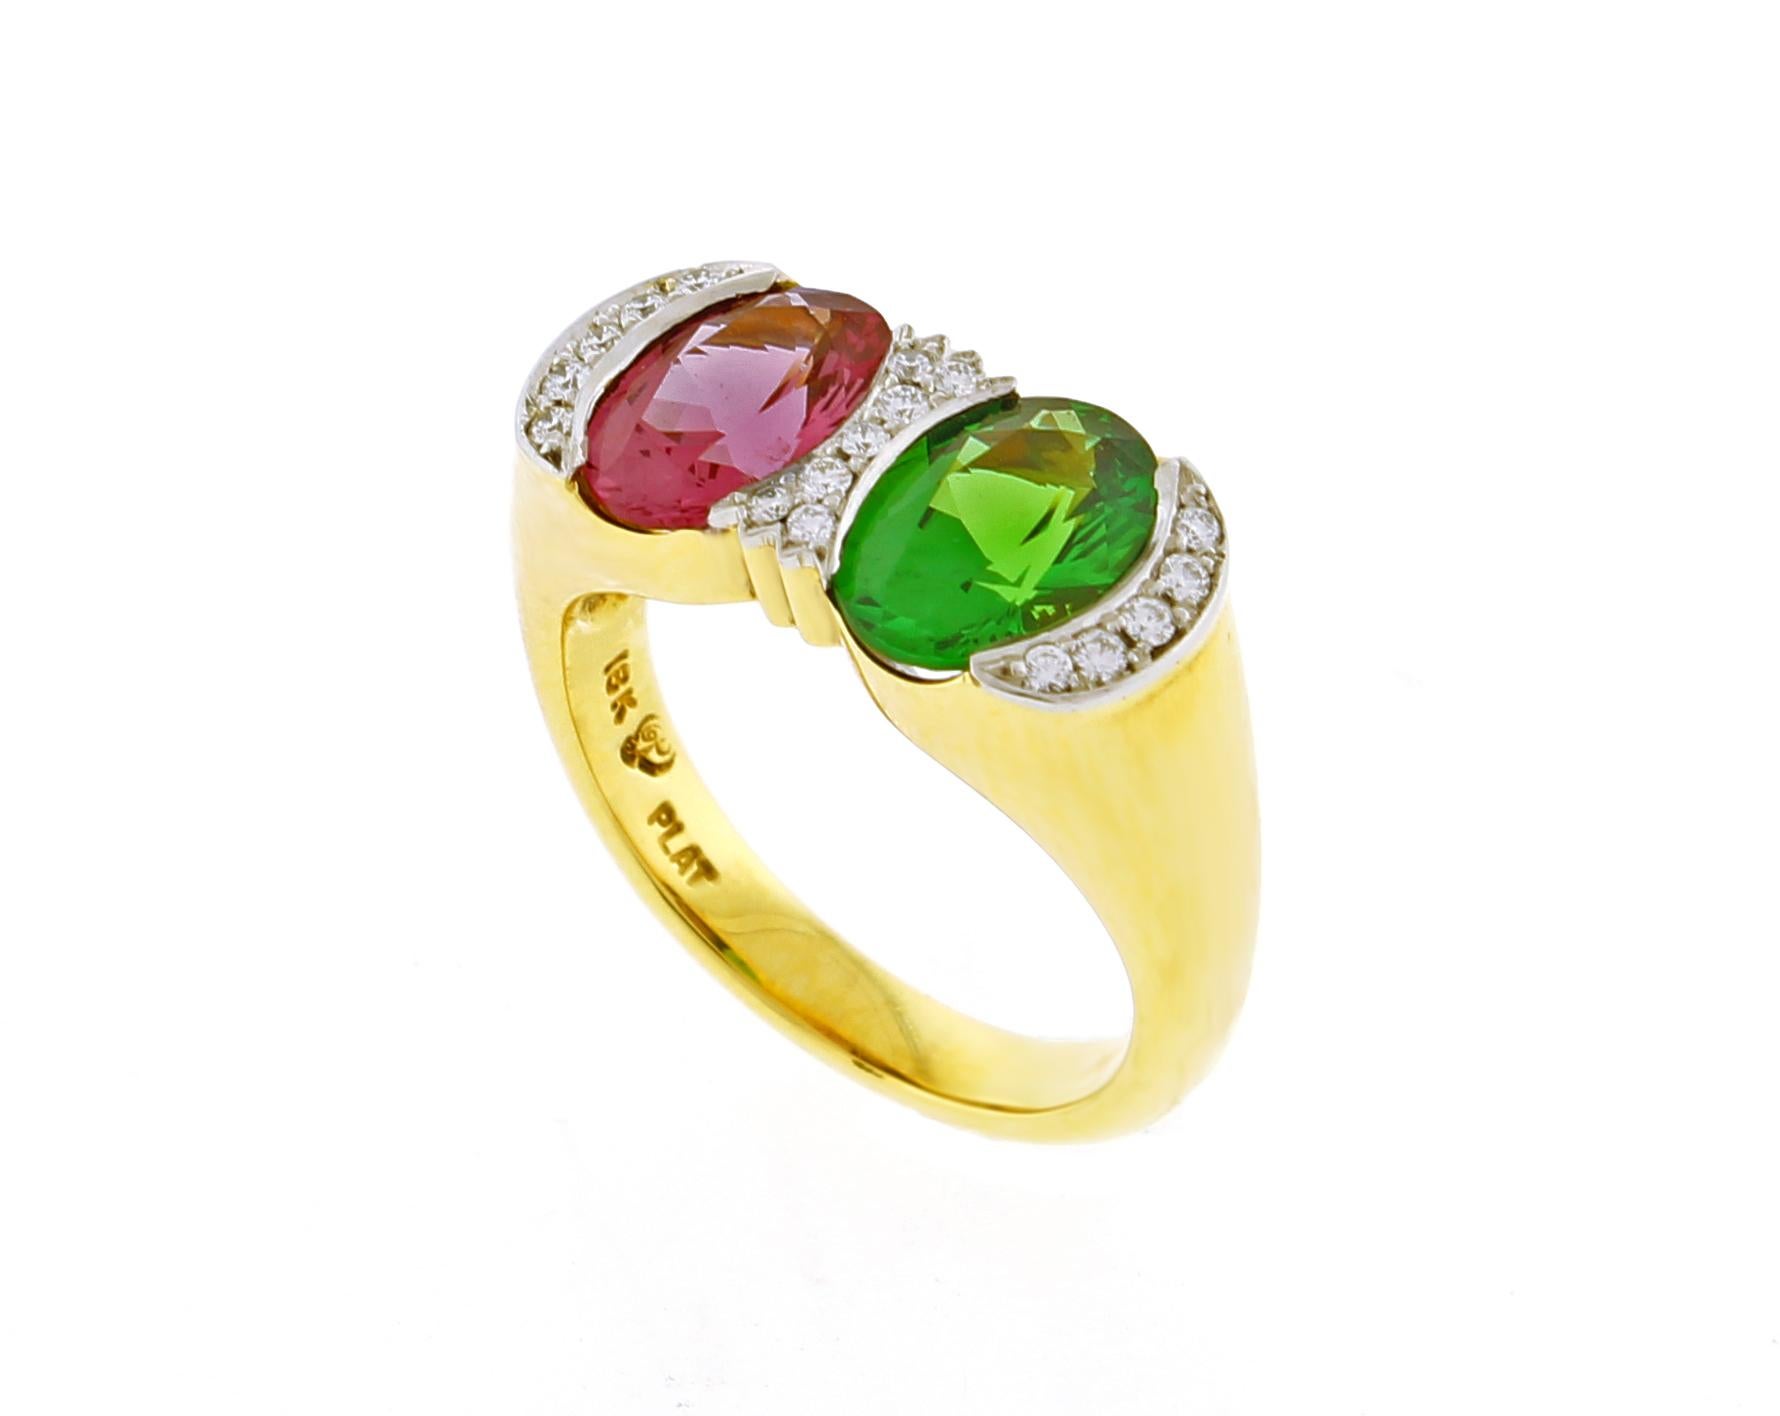 From the master ring makers of Pampillonia jewelers a twin oval pink Spinel, and Tsavorite diamond ring
♦ Designer: Pampillonia
♦ Metal: 18 karat and platinum
♦ Tsavorite =1.73 carats   
♦ Pink Spinel =1.66
♦ 7 diamonds=.11 carats
♦ Size 6,